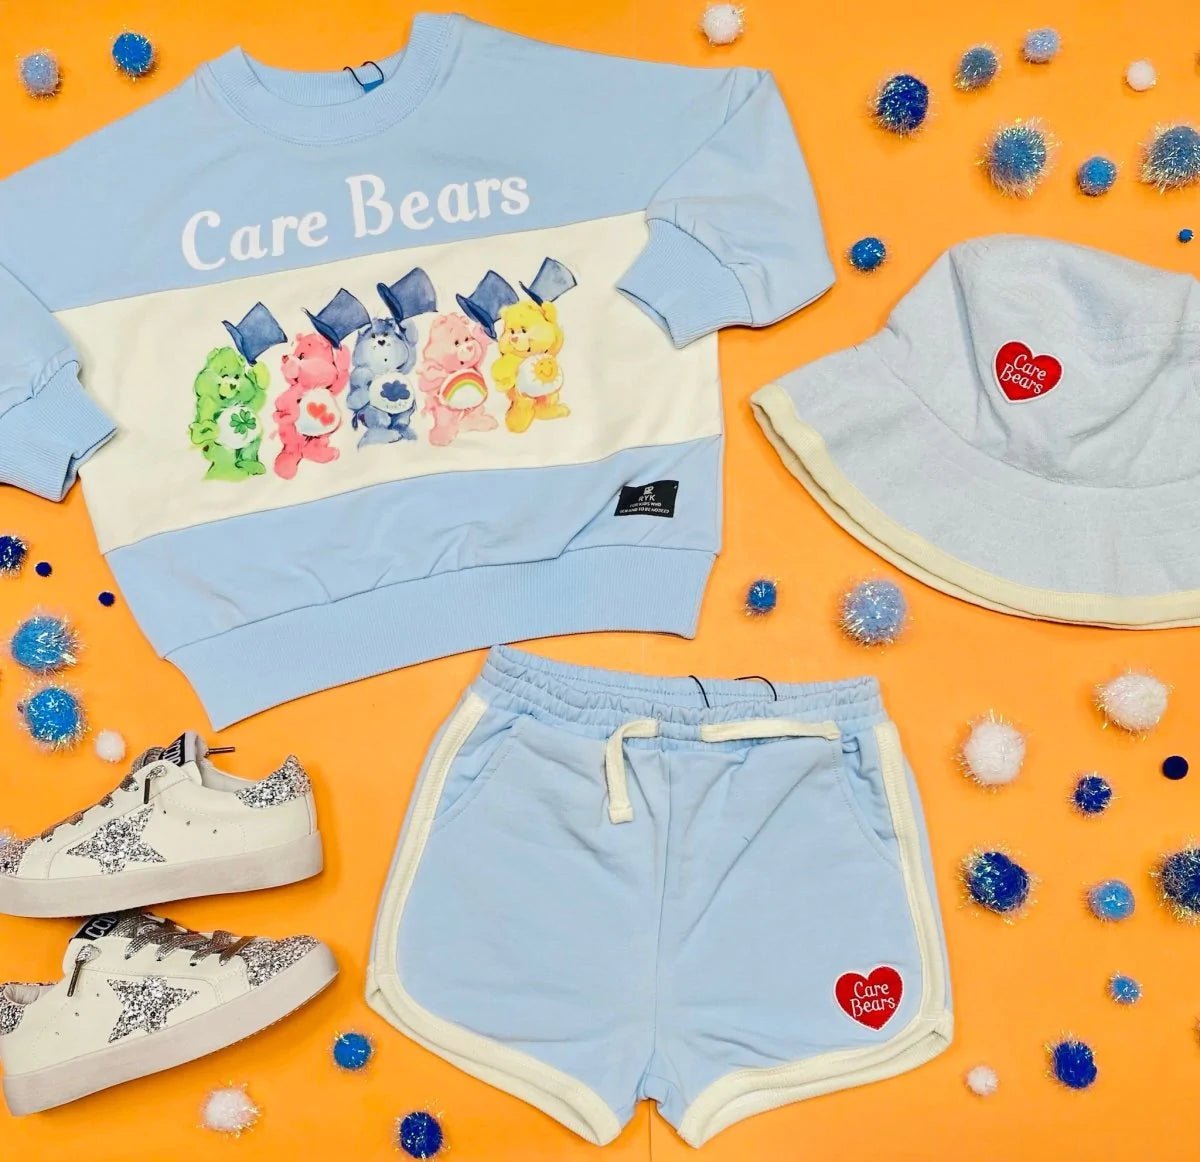 Rock Your Baby Loves Care Bears Just Like You Do - Mini Dreamers